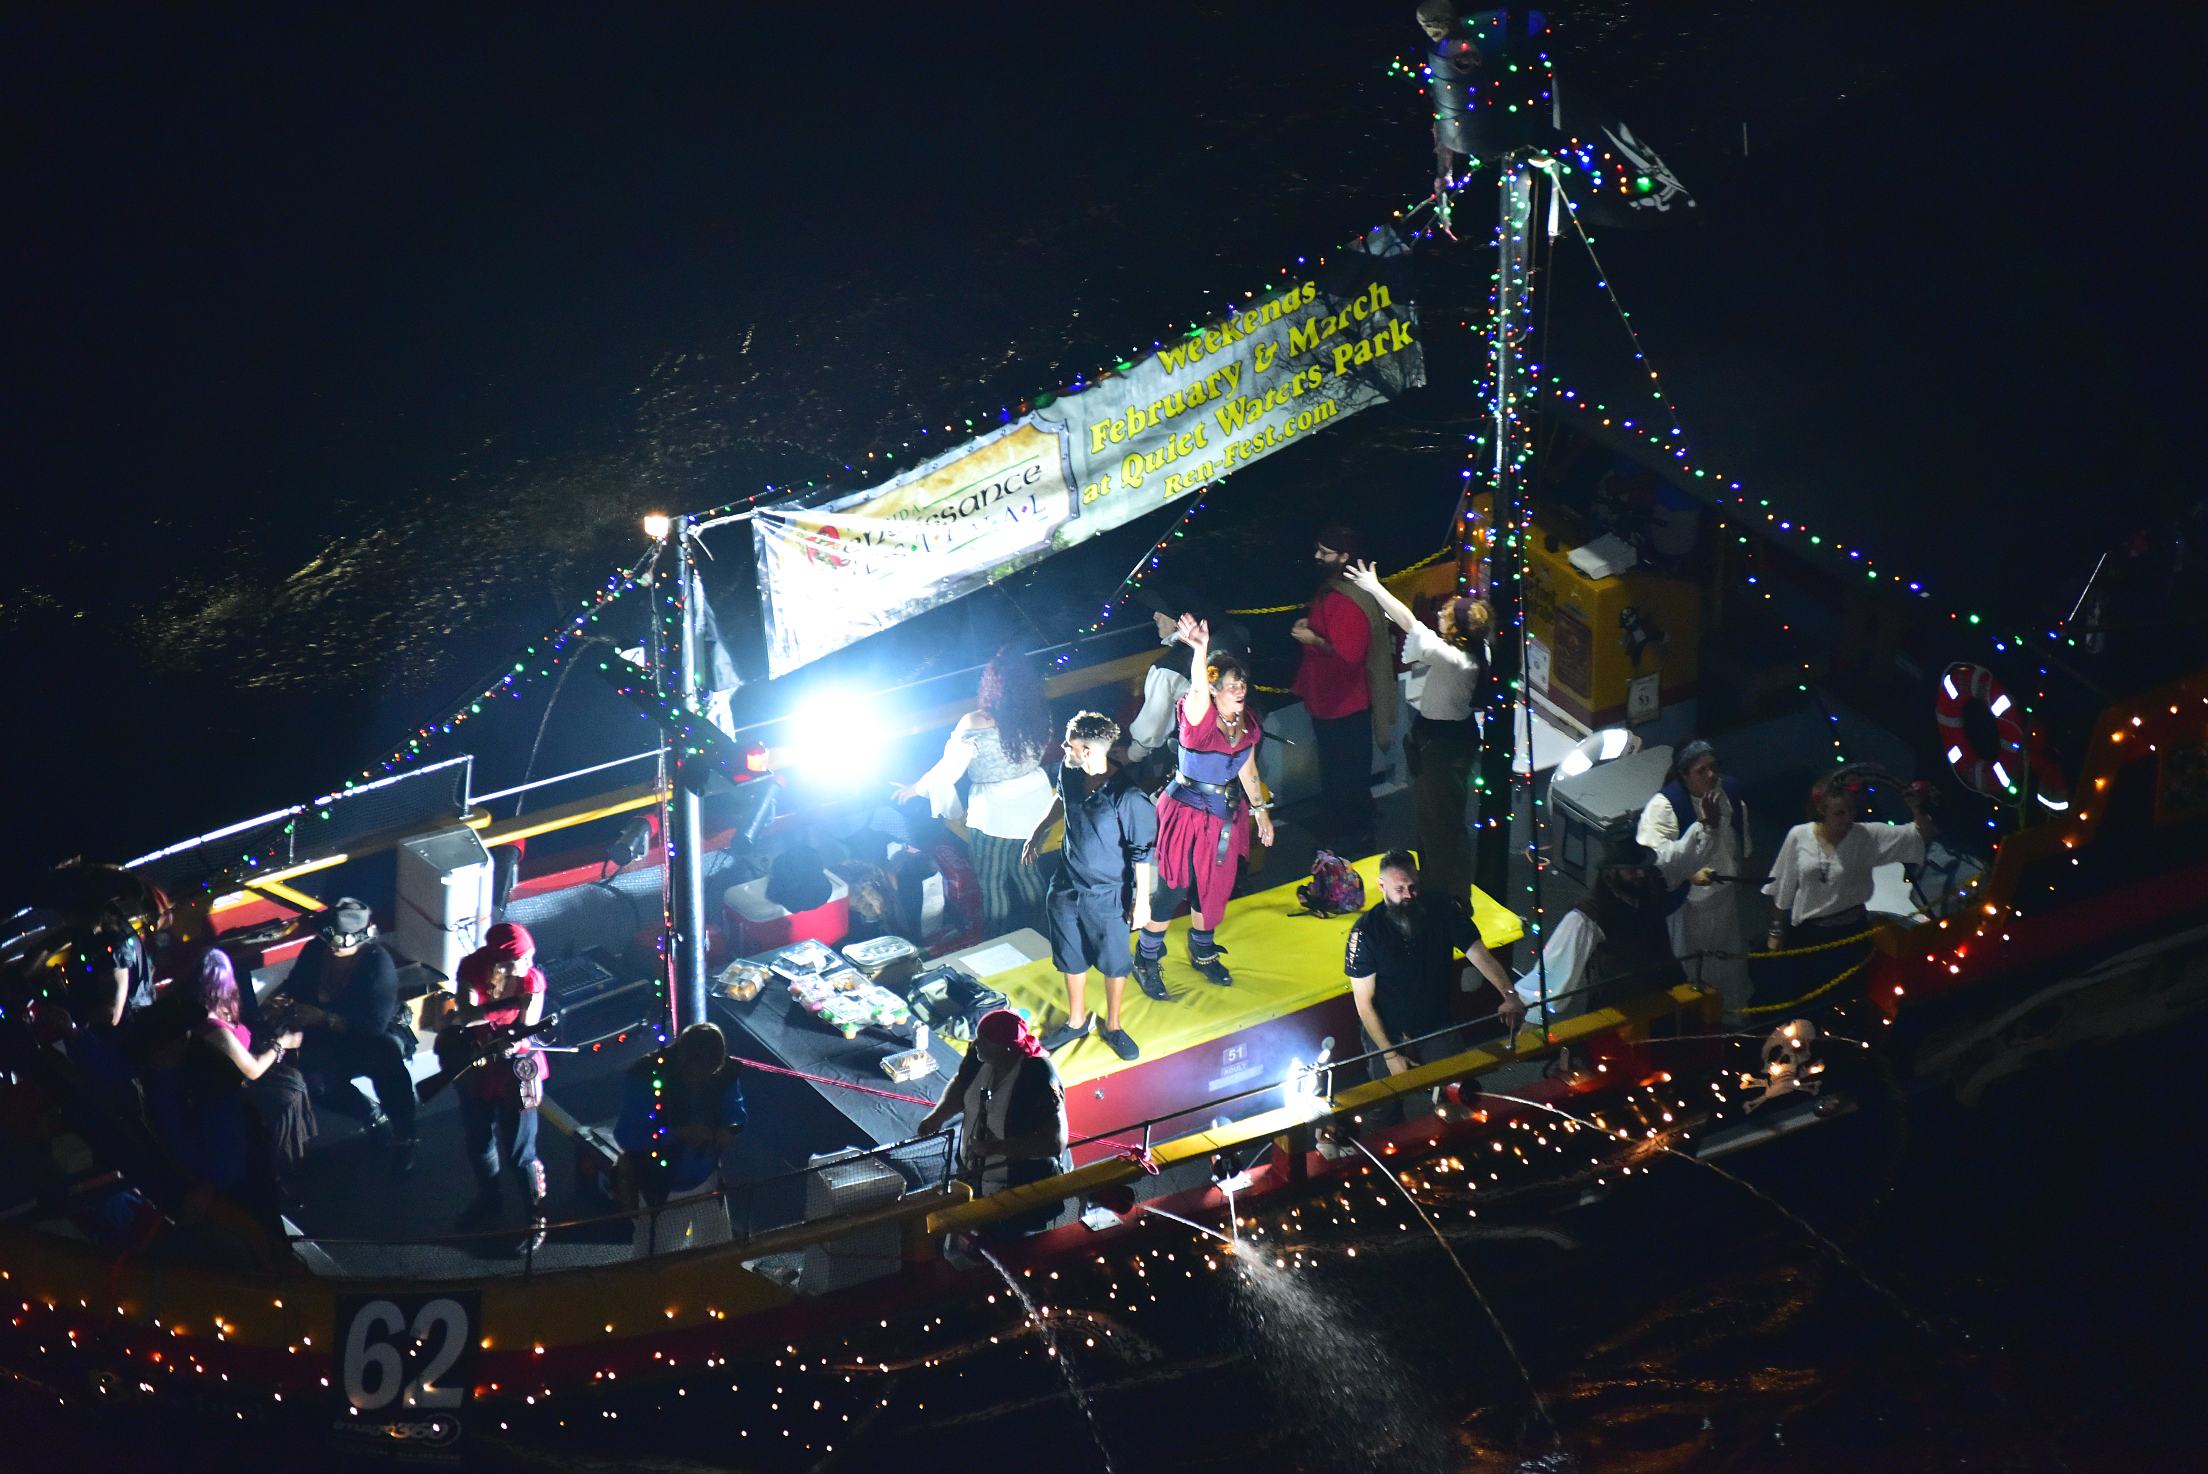 Bluefoot Pirates with The Florida Renaissance Festival, boat number 62 in the 2021 Winterfest Boat Parade